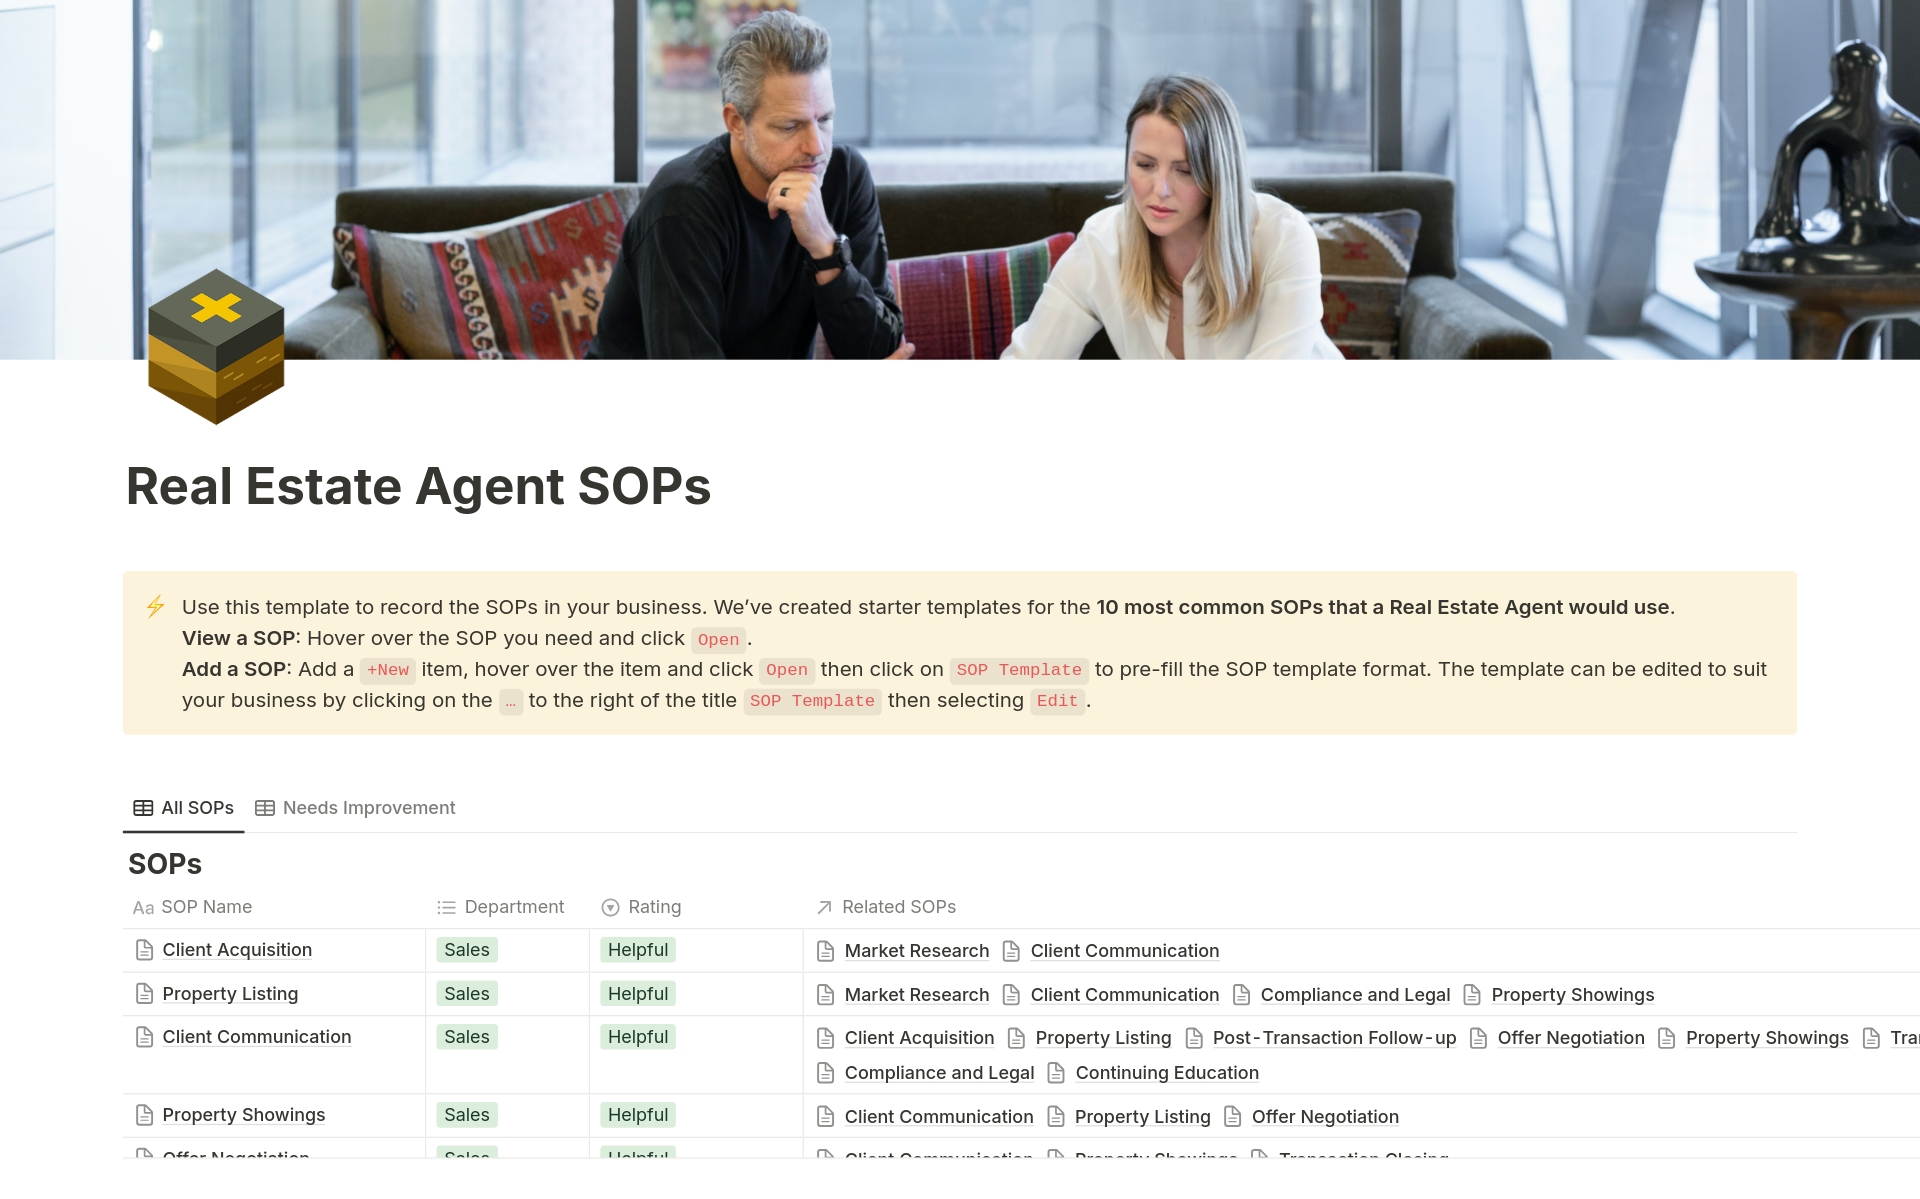 This template contains Standard Operating Procedures (SOPs) for real estate agents. It covers client acquisition through lead generation, prospecting, networking, and closing new clients. Includes 20+ pages of best practice SOPs to save you 10+ hours of research.